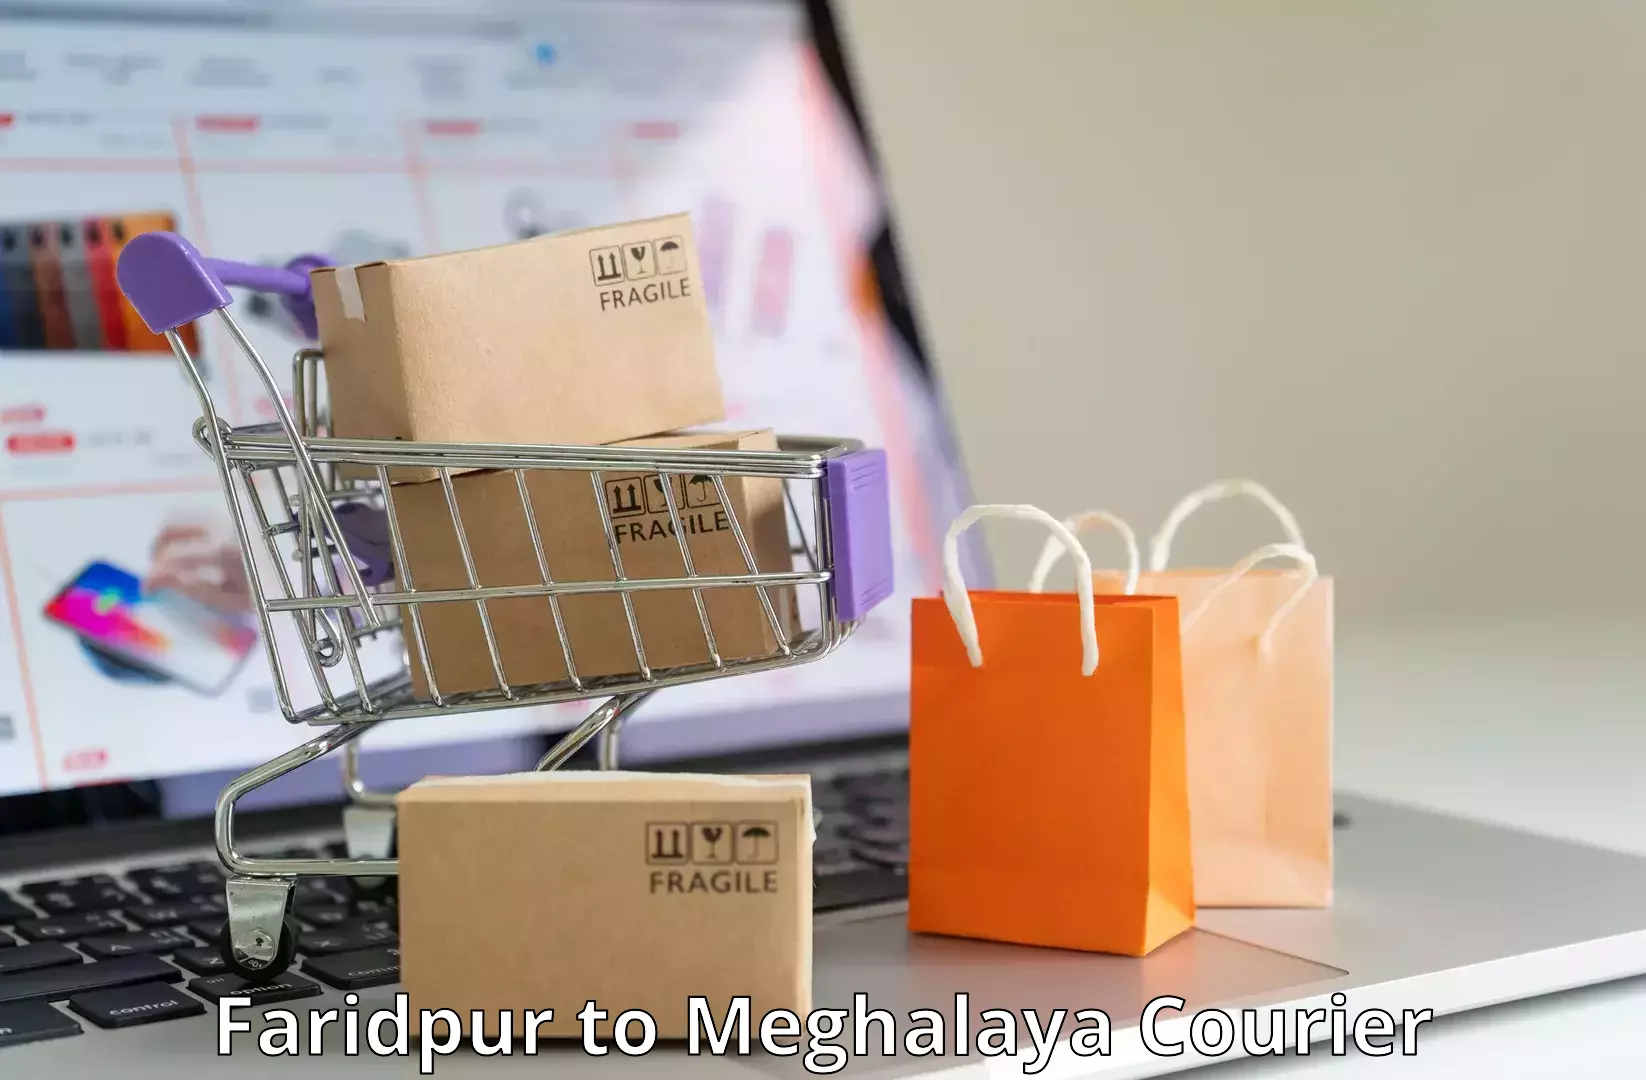 Efficient parcel service in Faridpur to Meghalaya